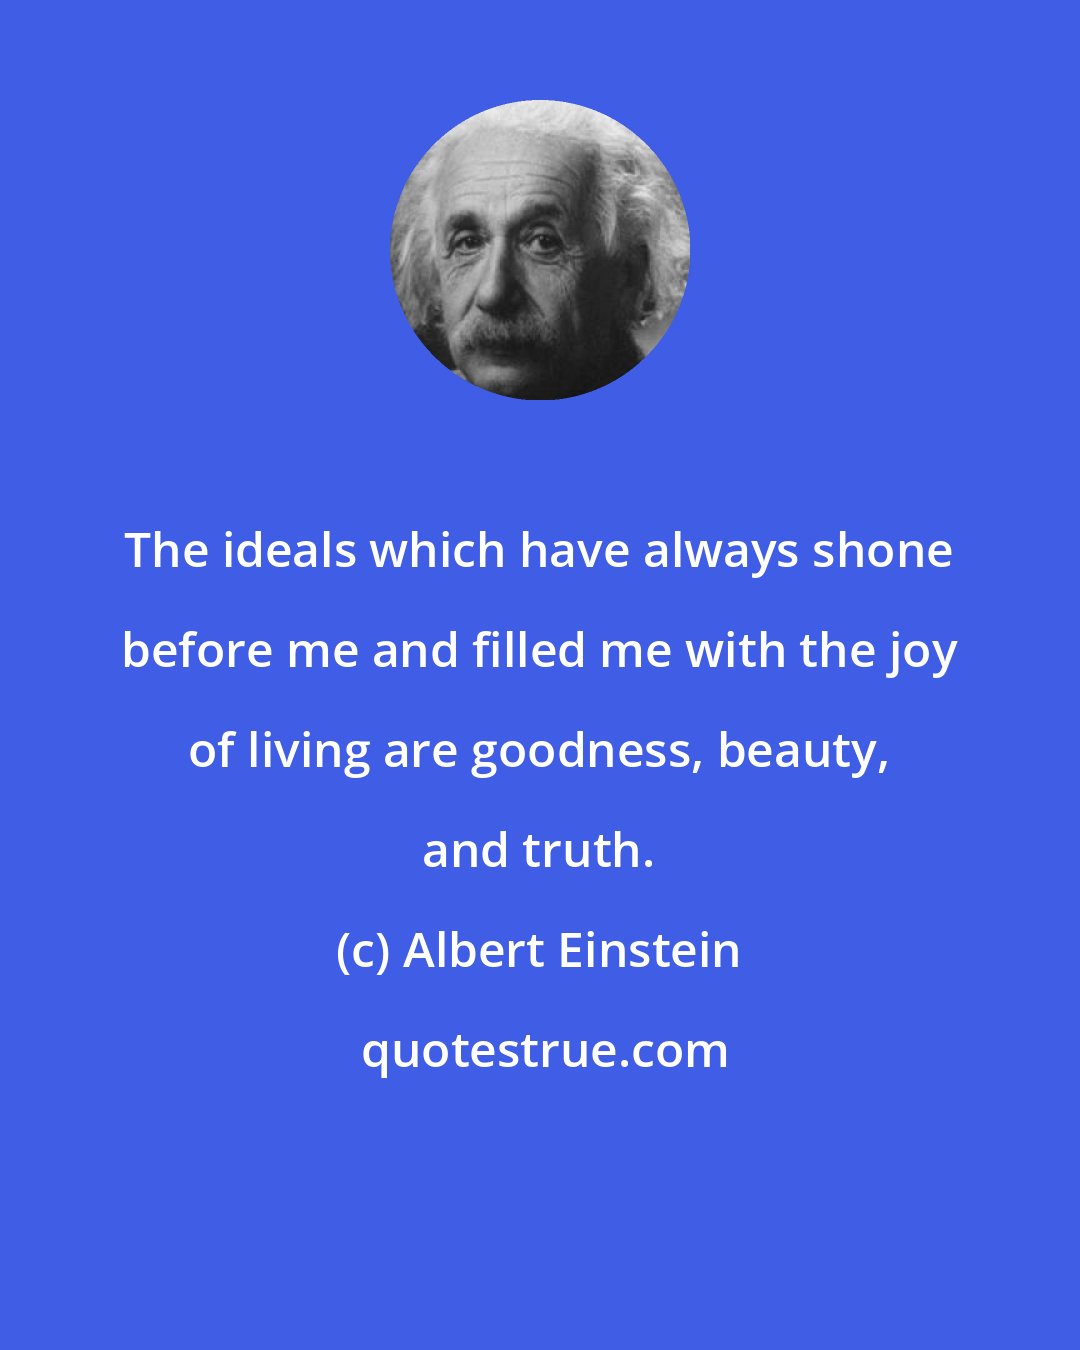 Albert Einstein: The ideals which have always shone before me and filled me with the joy of living are goodness, beauty, and truth.